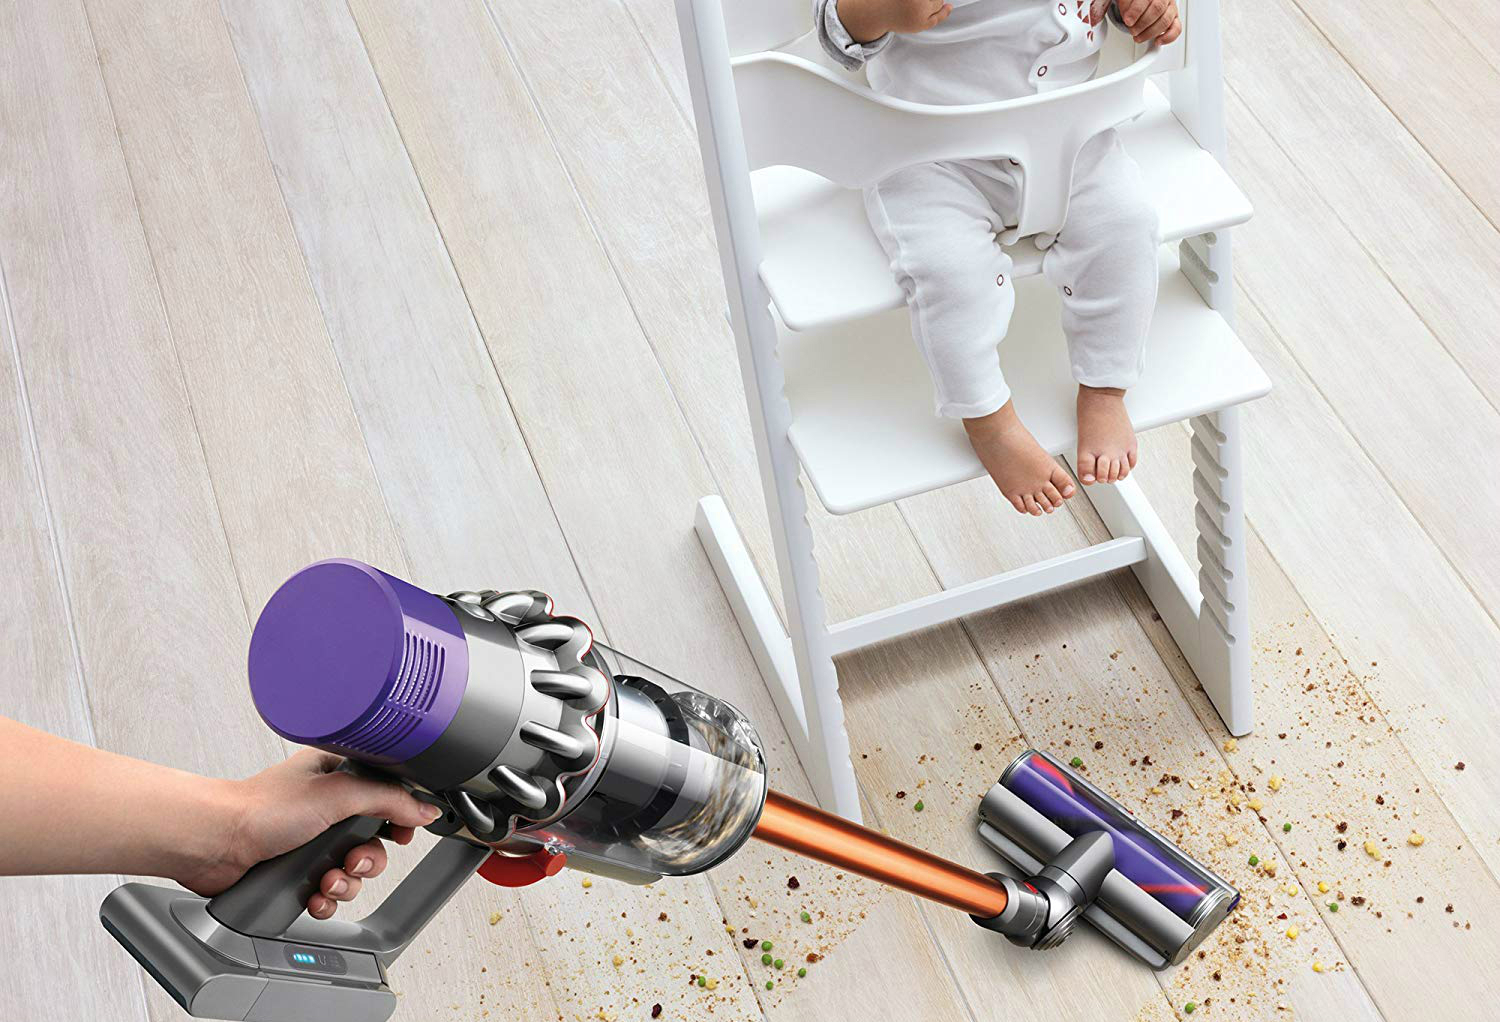 dyson vacuum cleaner deals on amazon cyclone v10 absolute lightweight cordless stick 3